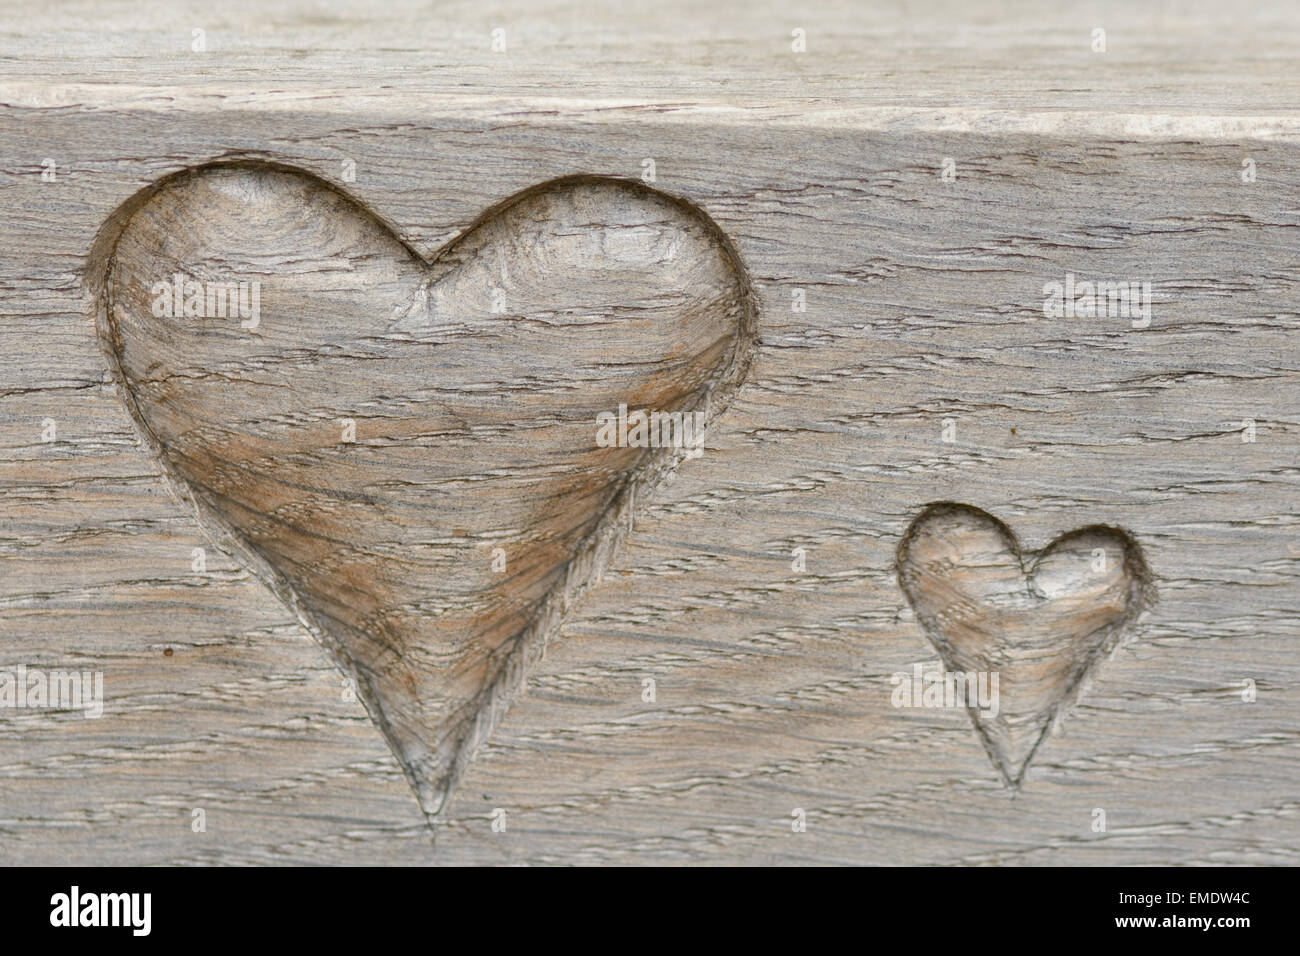 Love hearts carved into edge of wooden bench Stock Photo